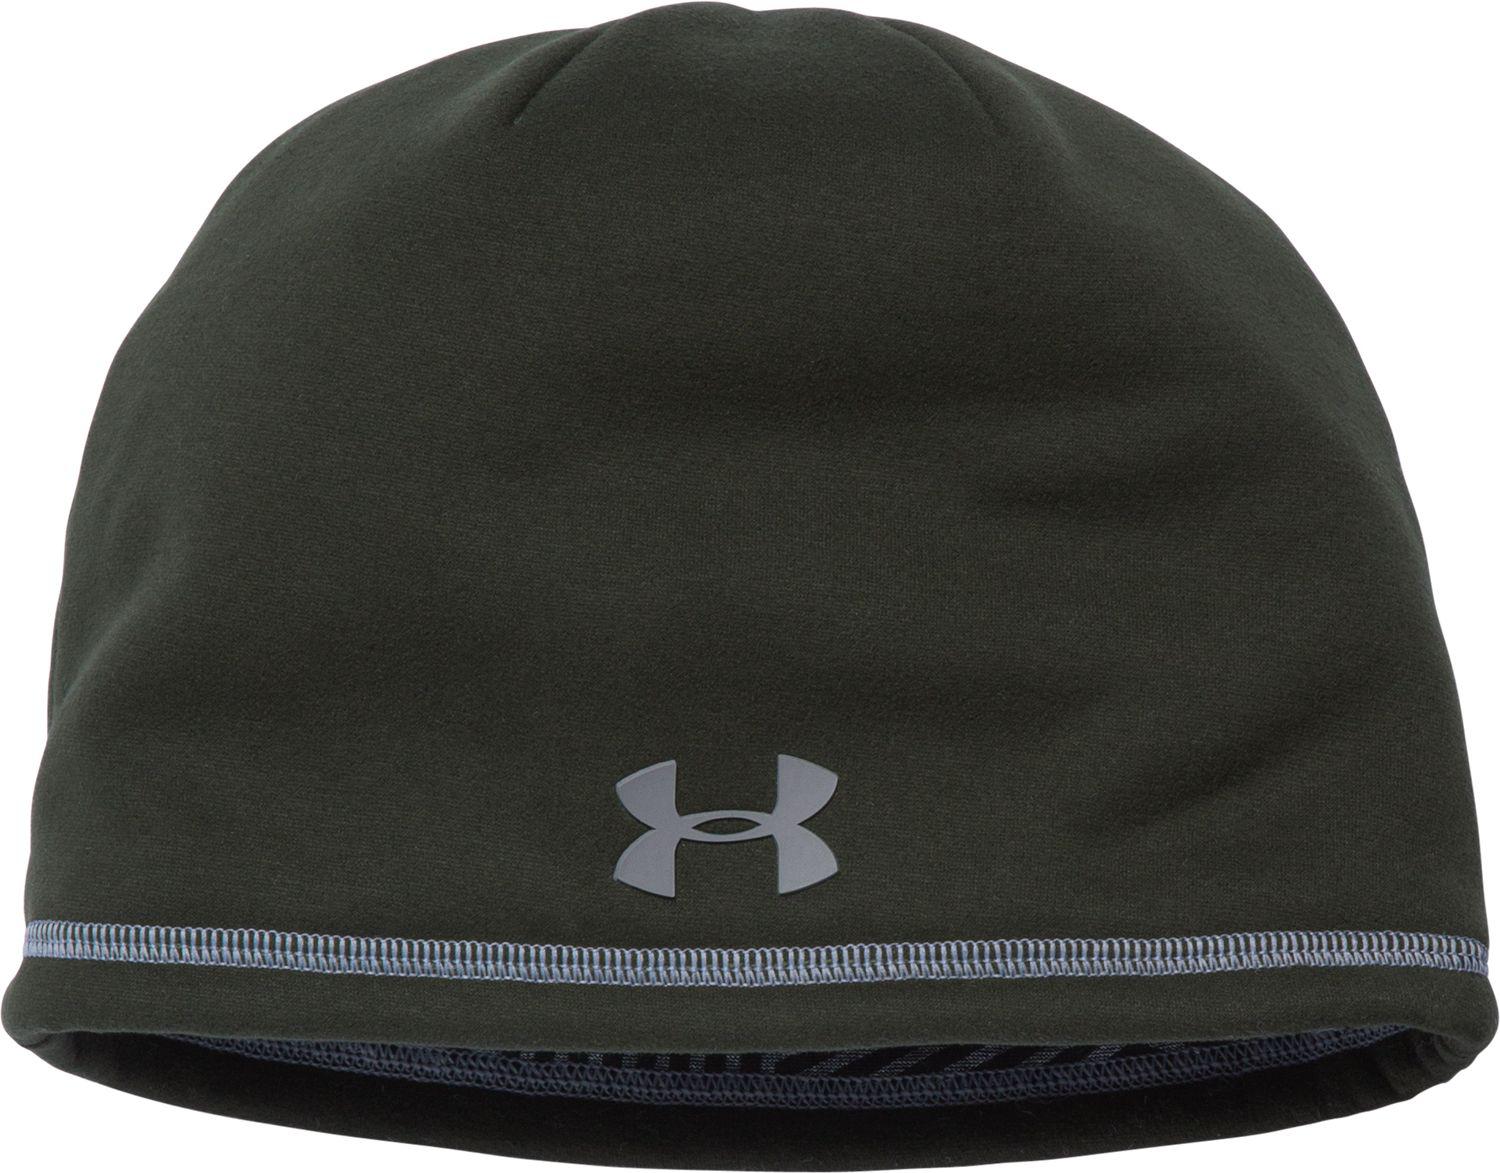 Under Armor Cold Gear Hats Top Sellers, GET 50% OFF, ricettecuco.it